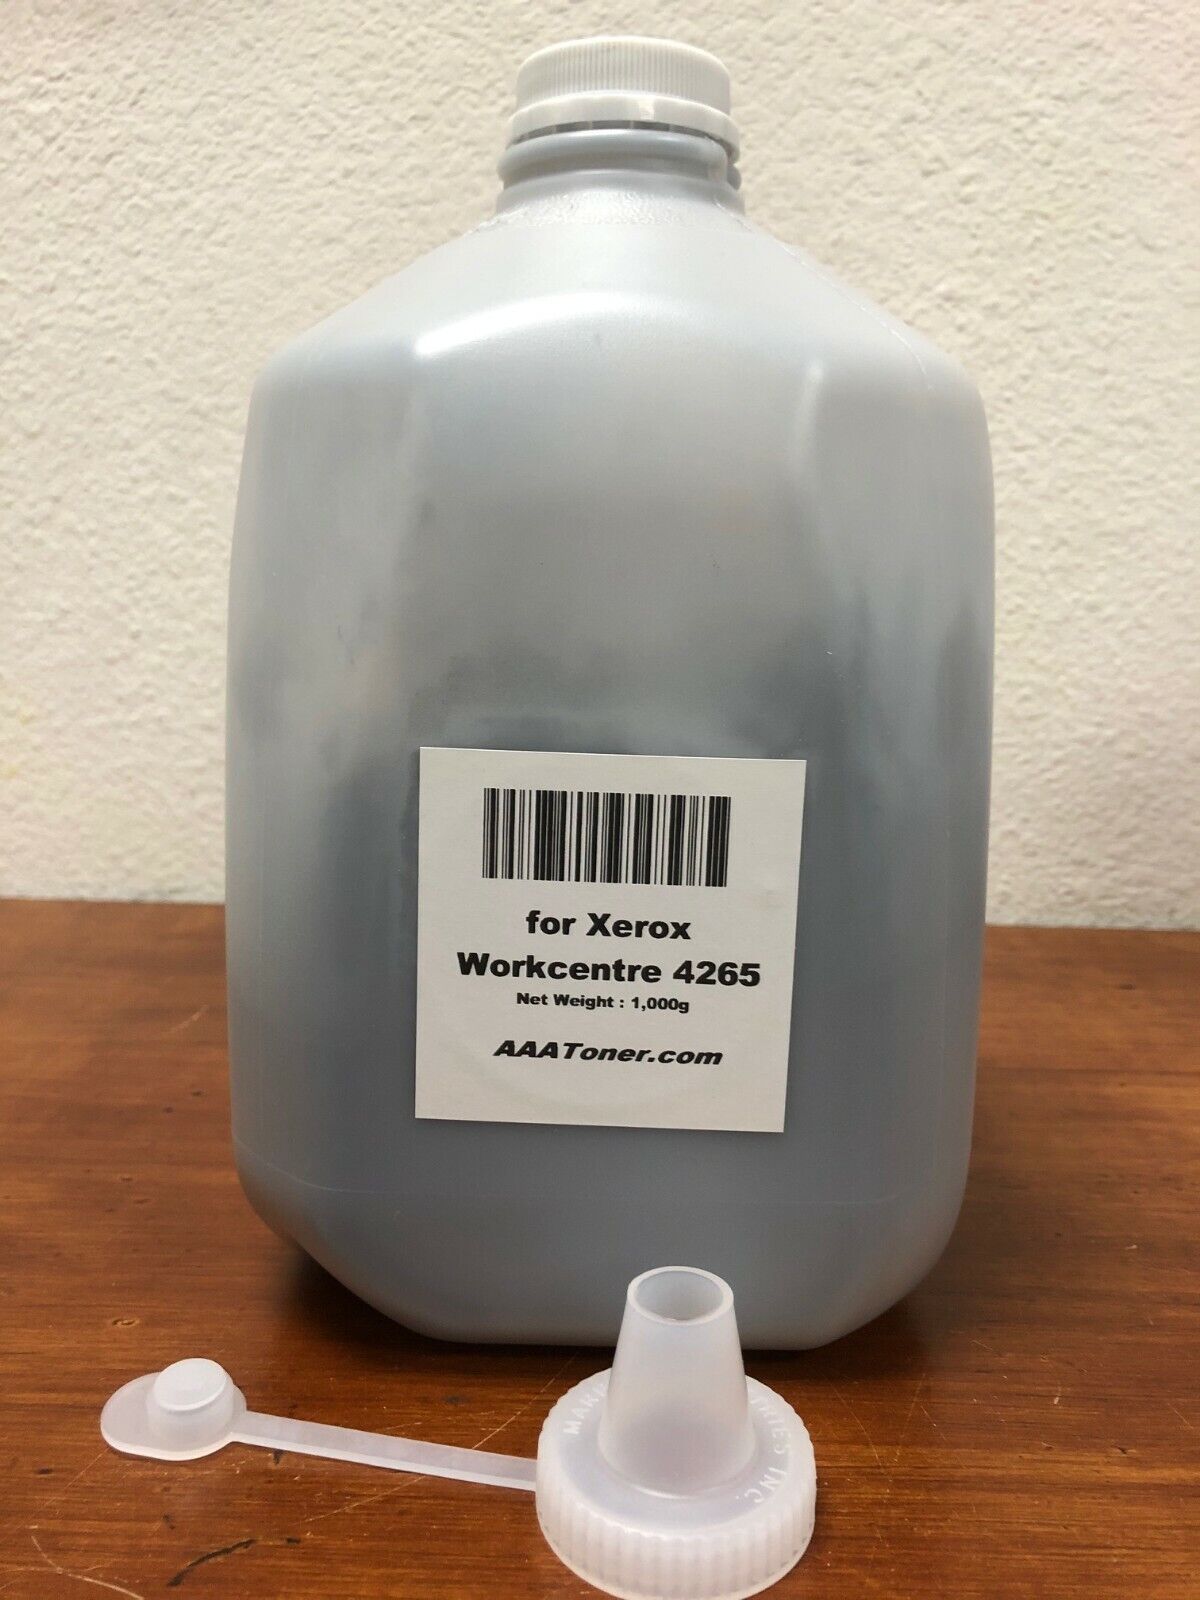 (1,000g/1kg) Toner Refill for Xerox WorkCentre 4265 Copier - (REFILL ONLY)